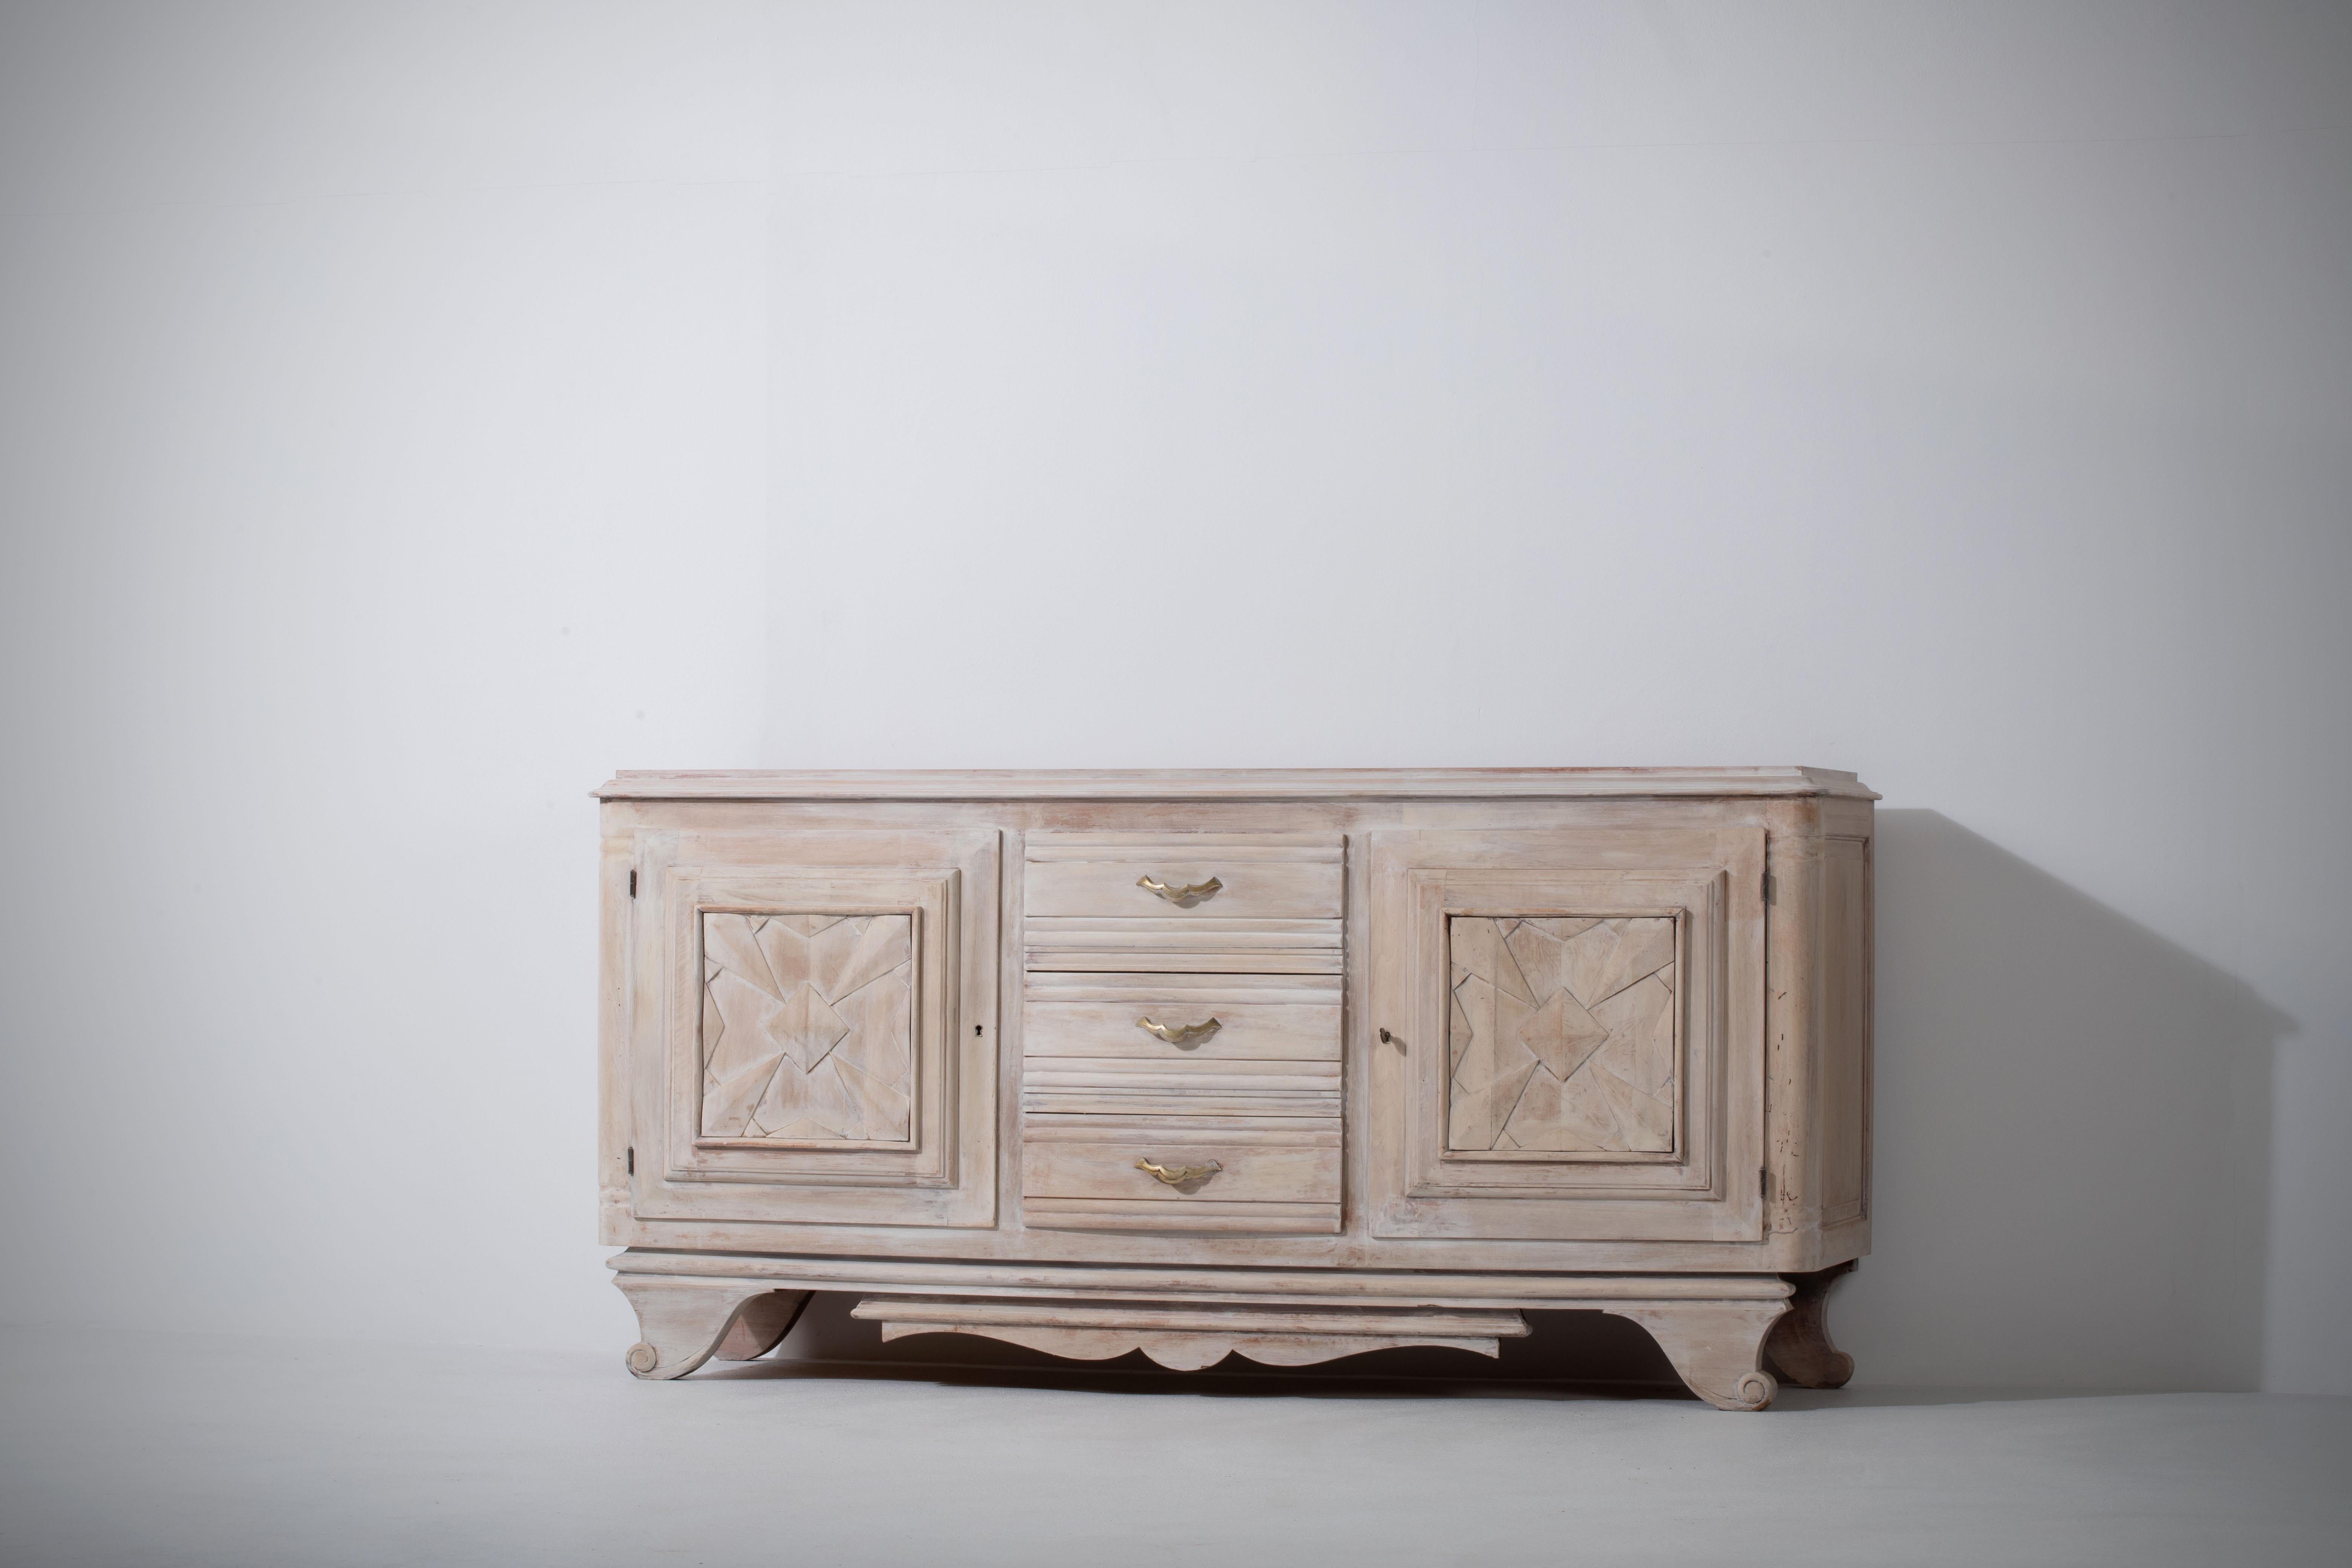 Large credenza, solid oak, France, 1940s.
Large Art Deco Brutalist sideboard. 
The credenza consists of two laterals storage facilities and covered with very detailed designed doors, in the center, a top drawer and a drink cabinet.
The refined